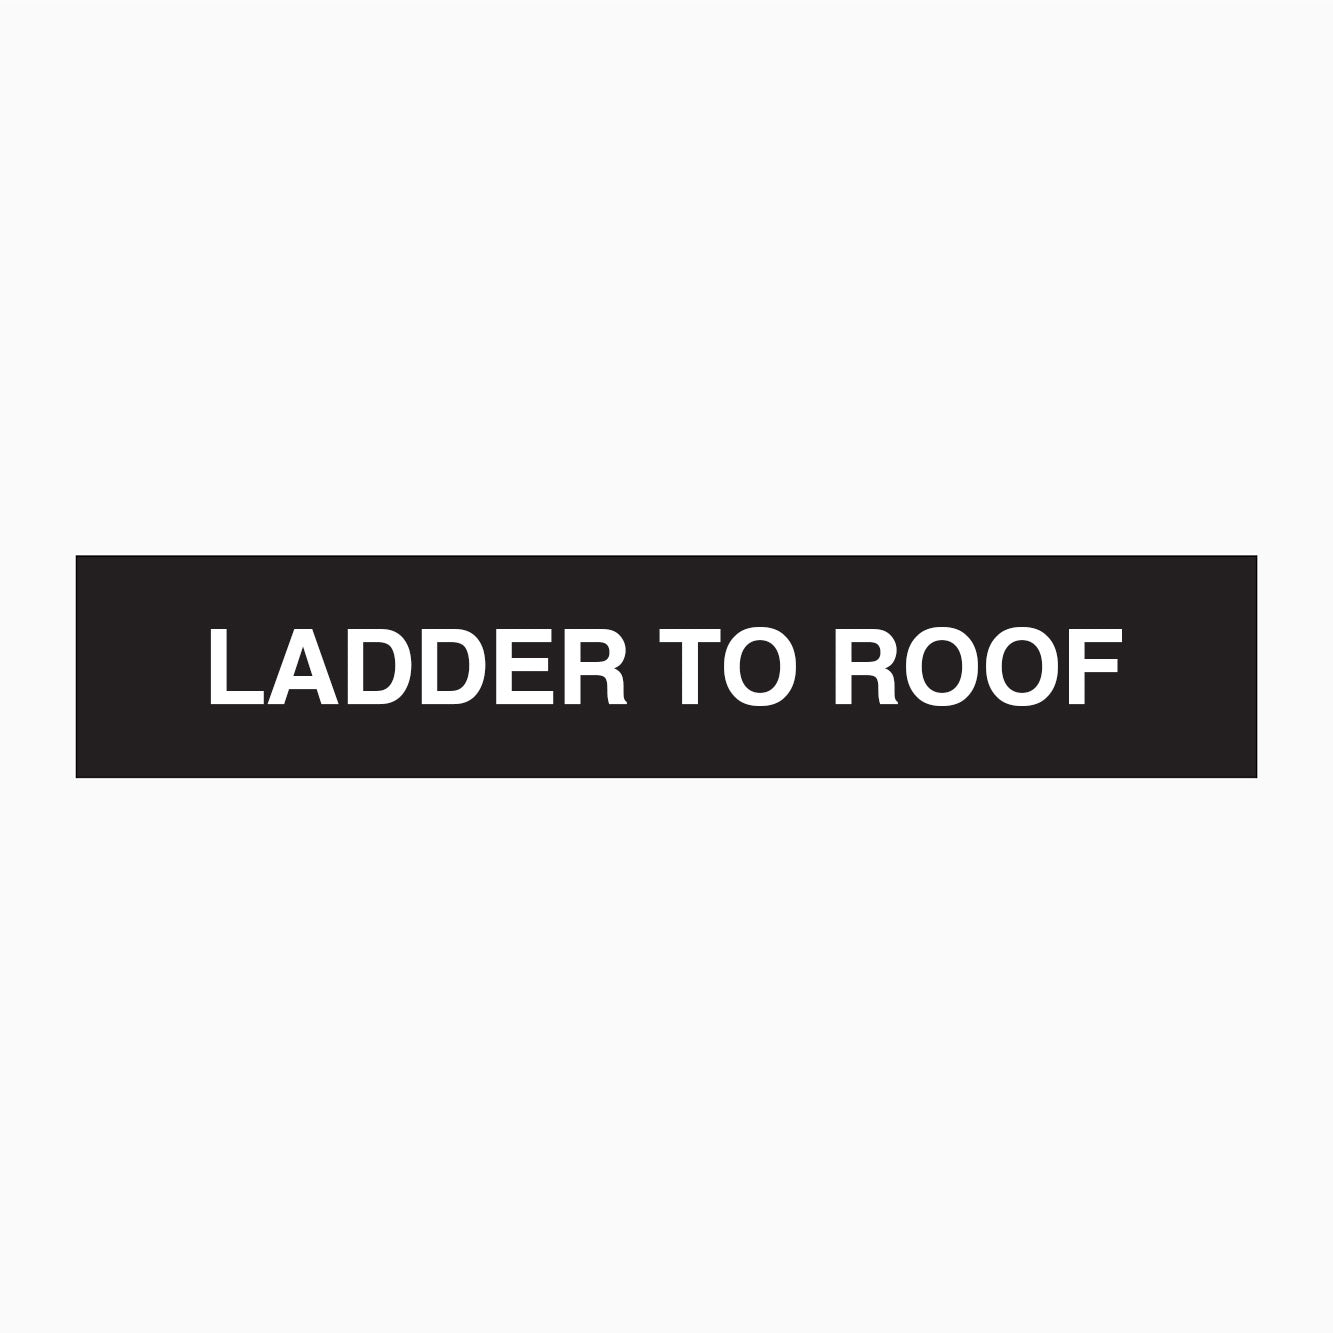 LADDER TO ROOF SIGN - STATUTORY SIGNS